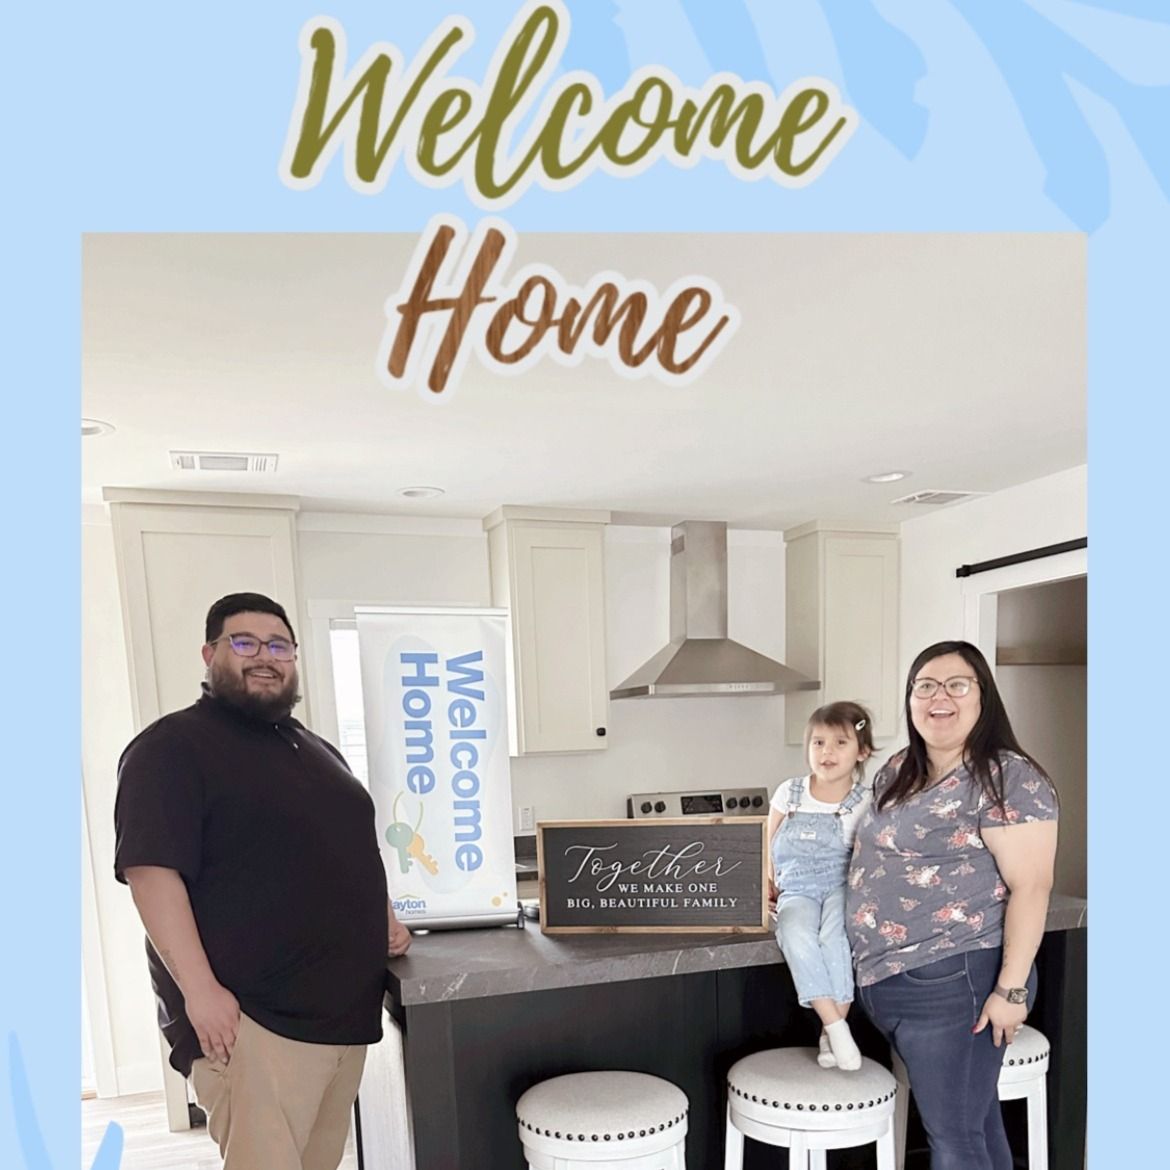 DANNIELLE C. welcome home image